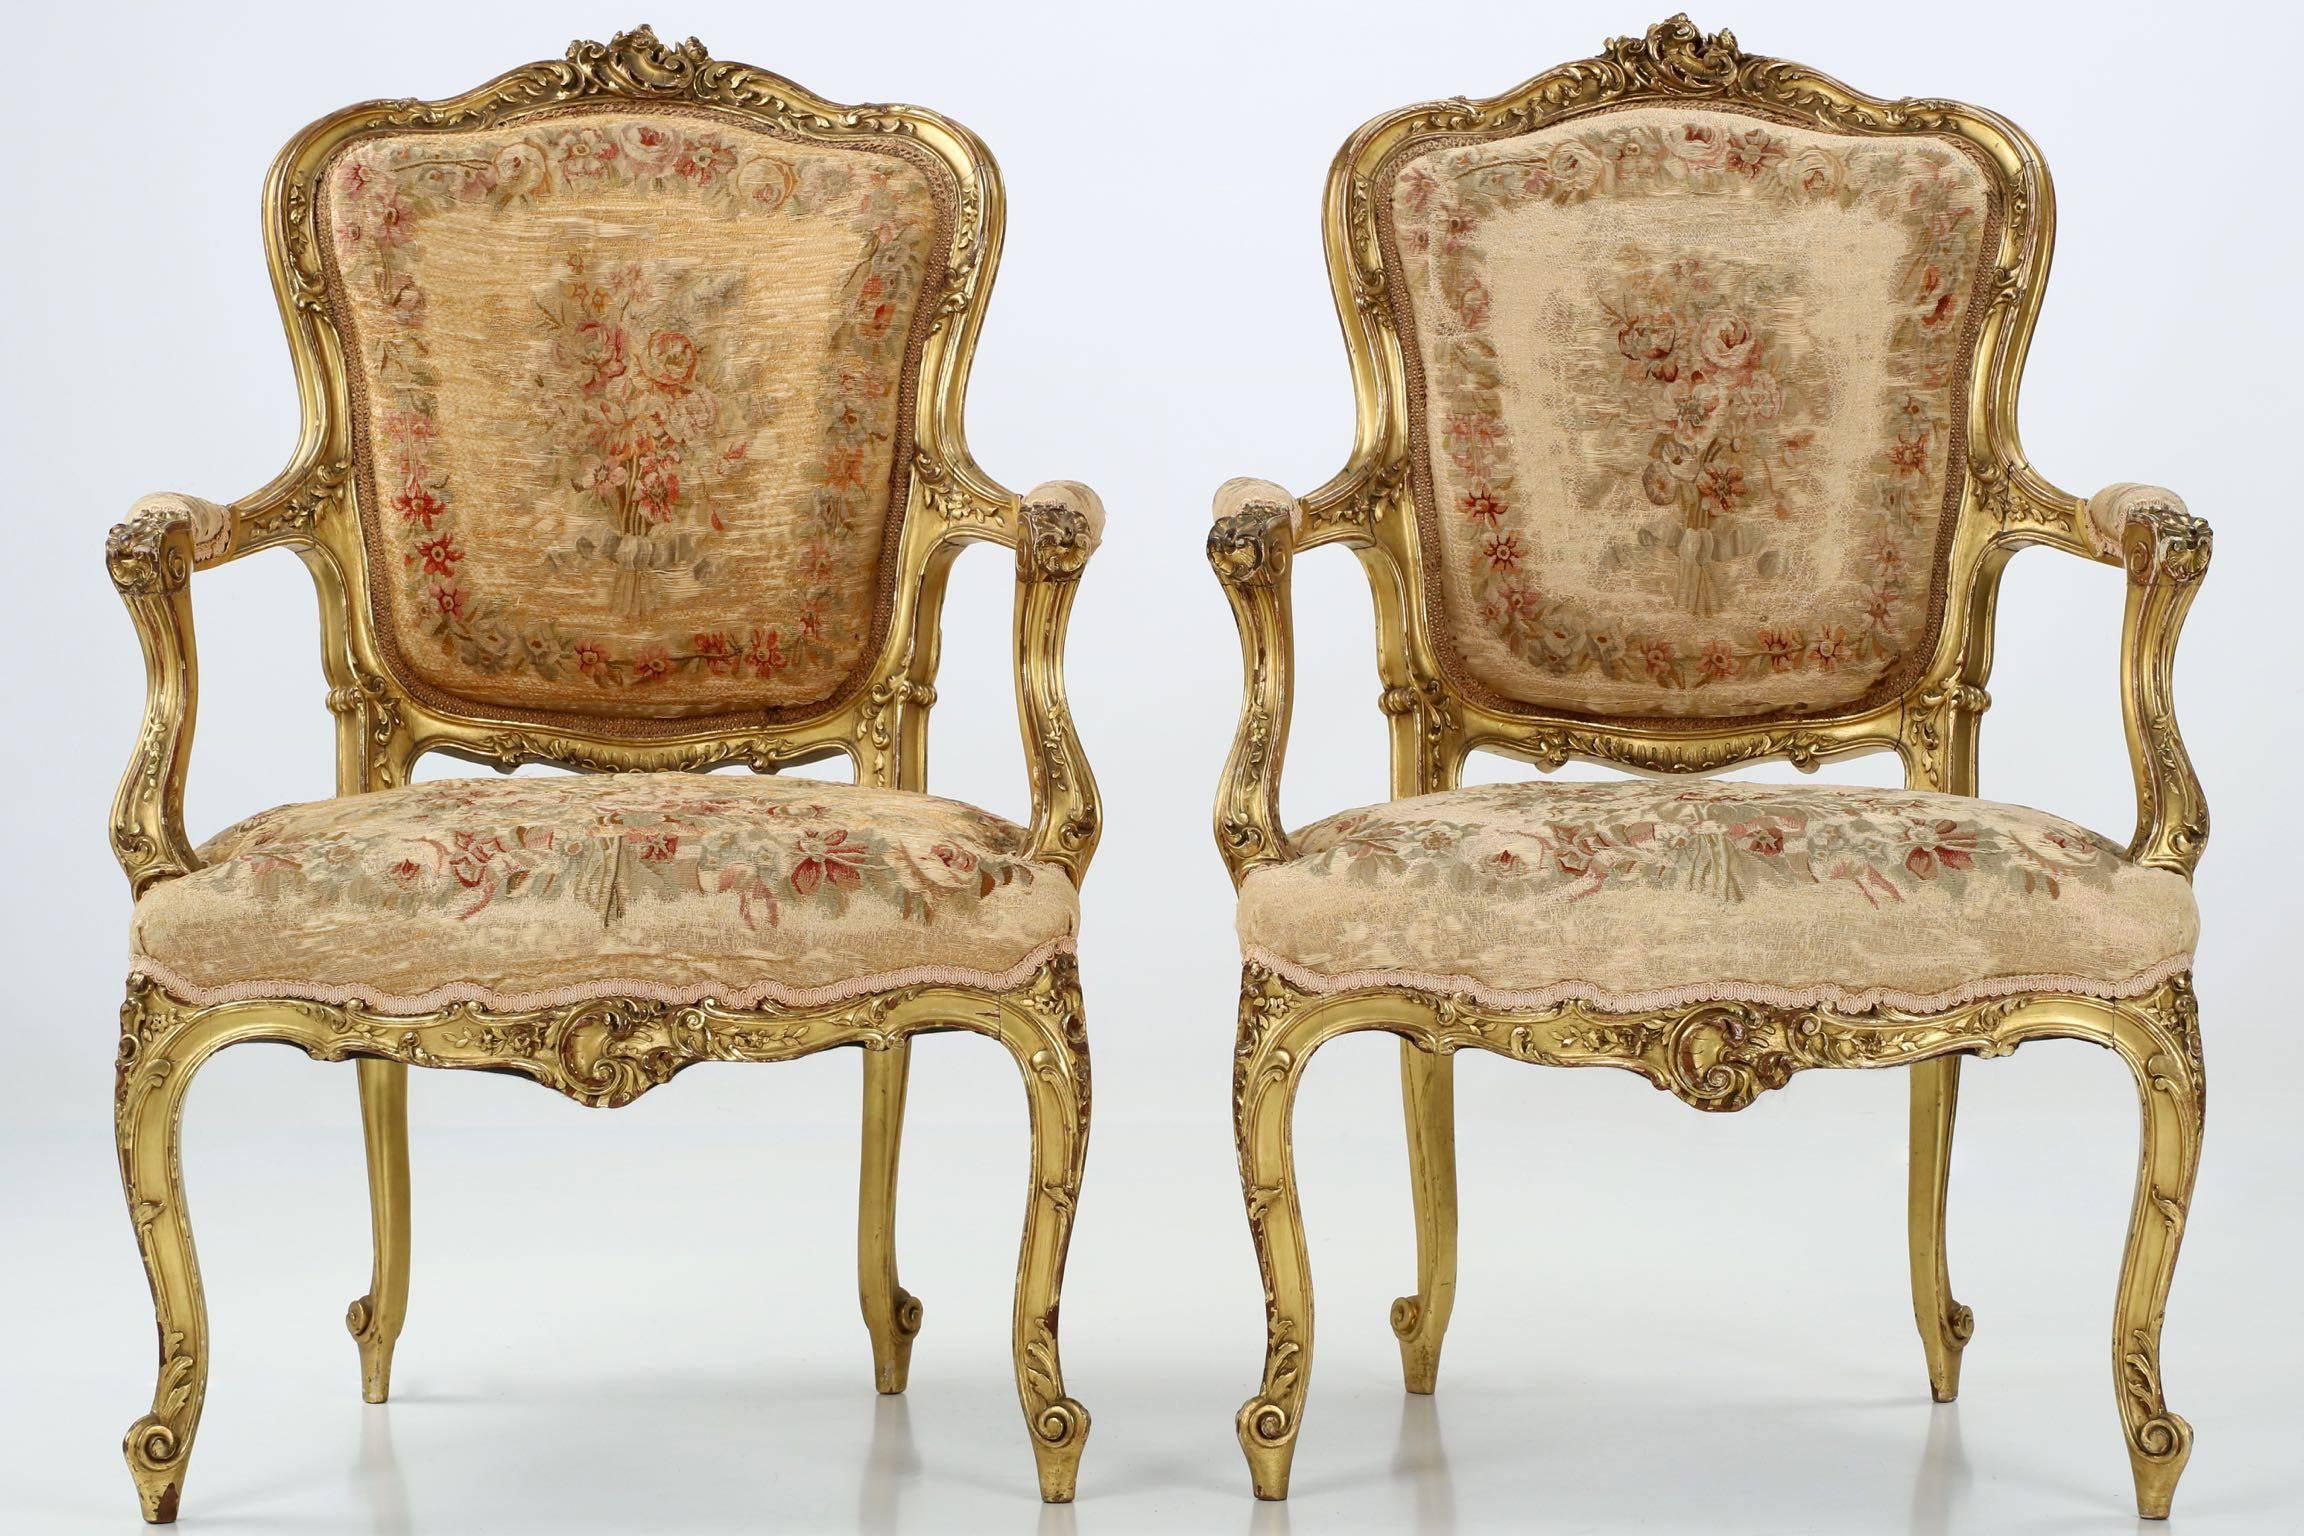 In every way these are a remarkably well developed pair of French fauteuils. Circulated during the last quarter of the 19th century, the quality and craftsmanship is above reproach and self evident. Each carving is crisp and unique, the theme